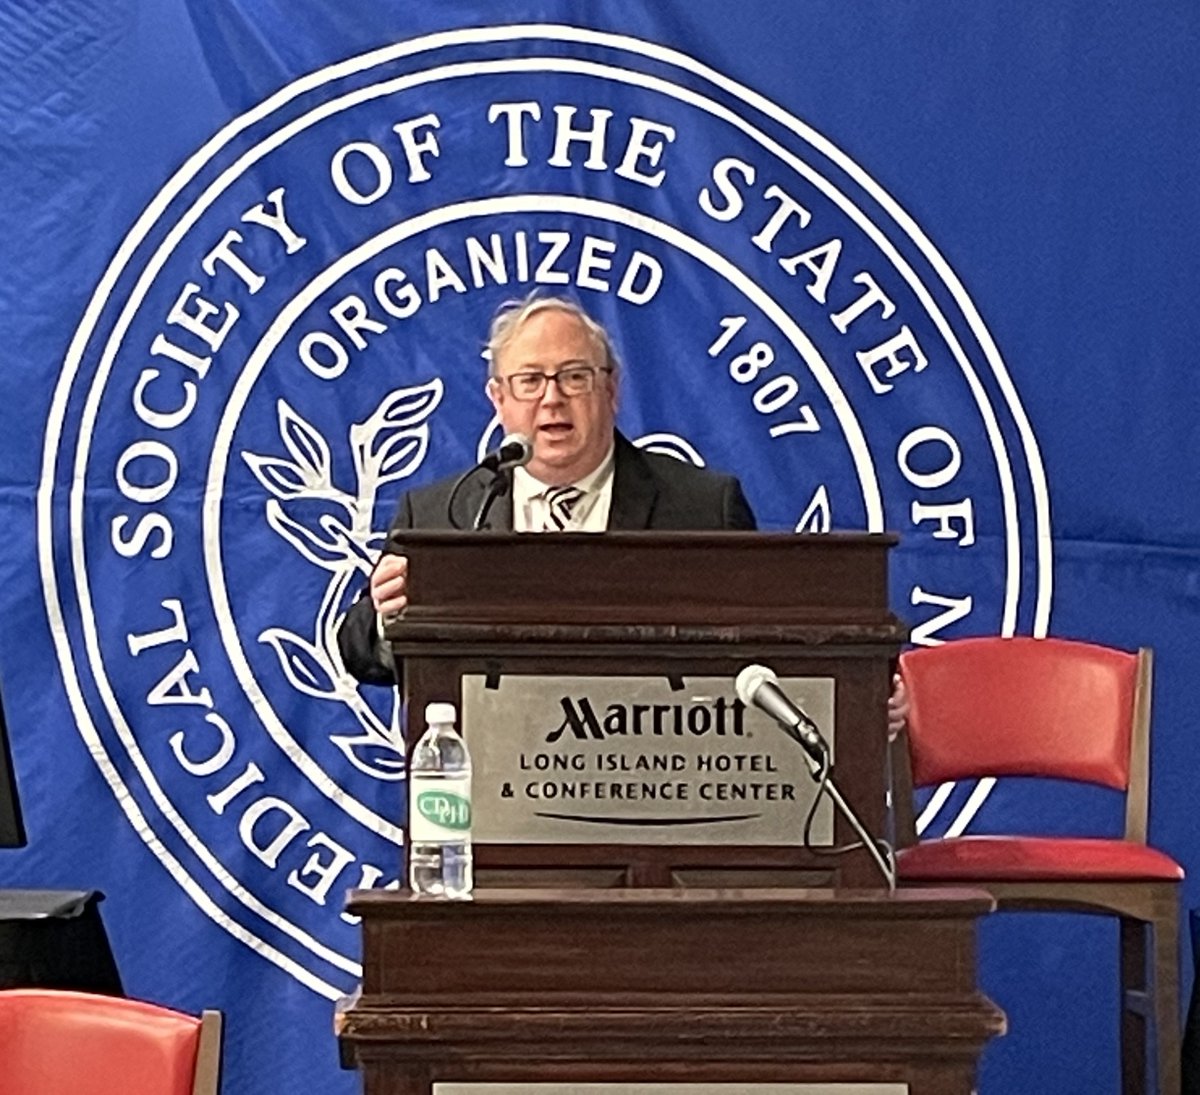 Thank you @MedSocietyNYS for the opportunity to discuss the myriad changes in public health over the last year and some of the challenges we face, including strengthening the healthcare workforce, access to care, and the overdose epidemic.